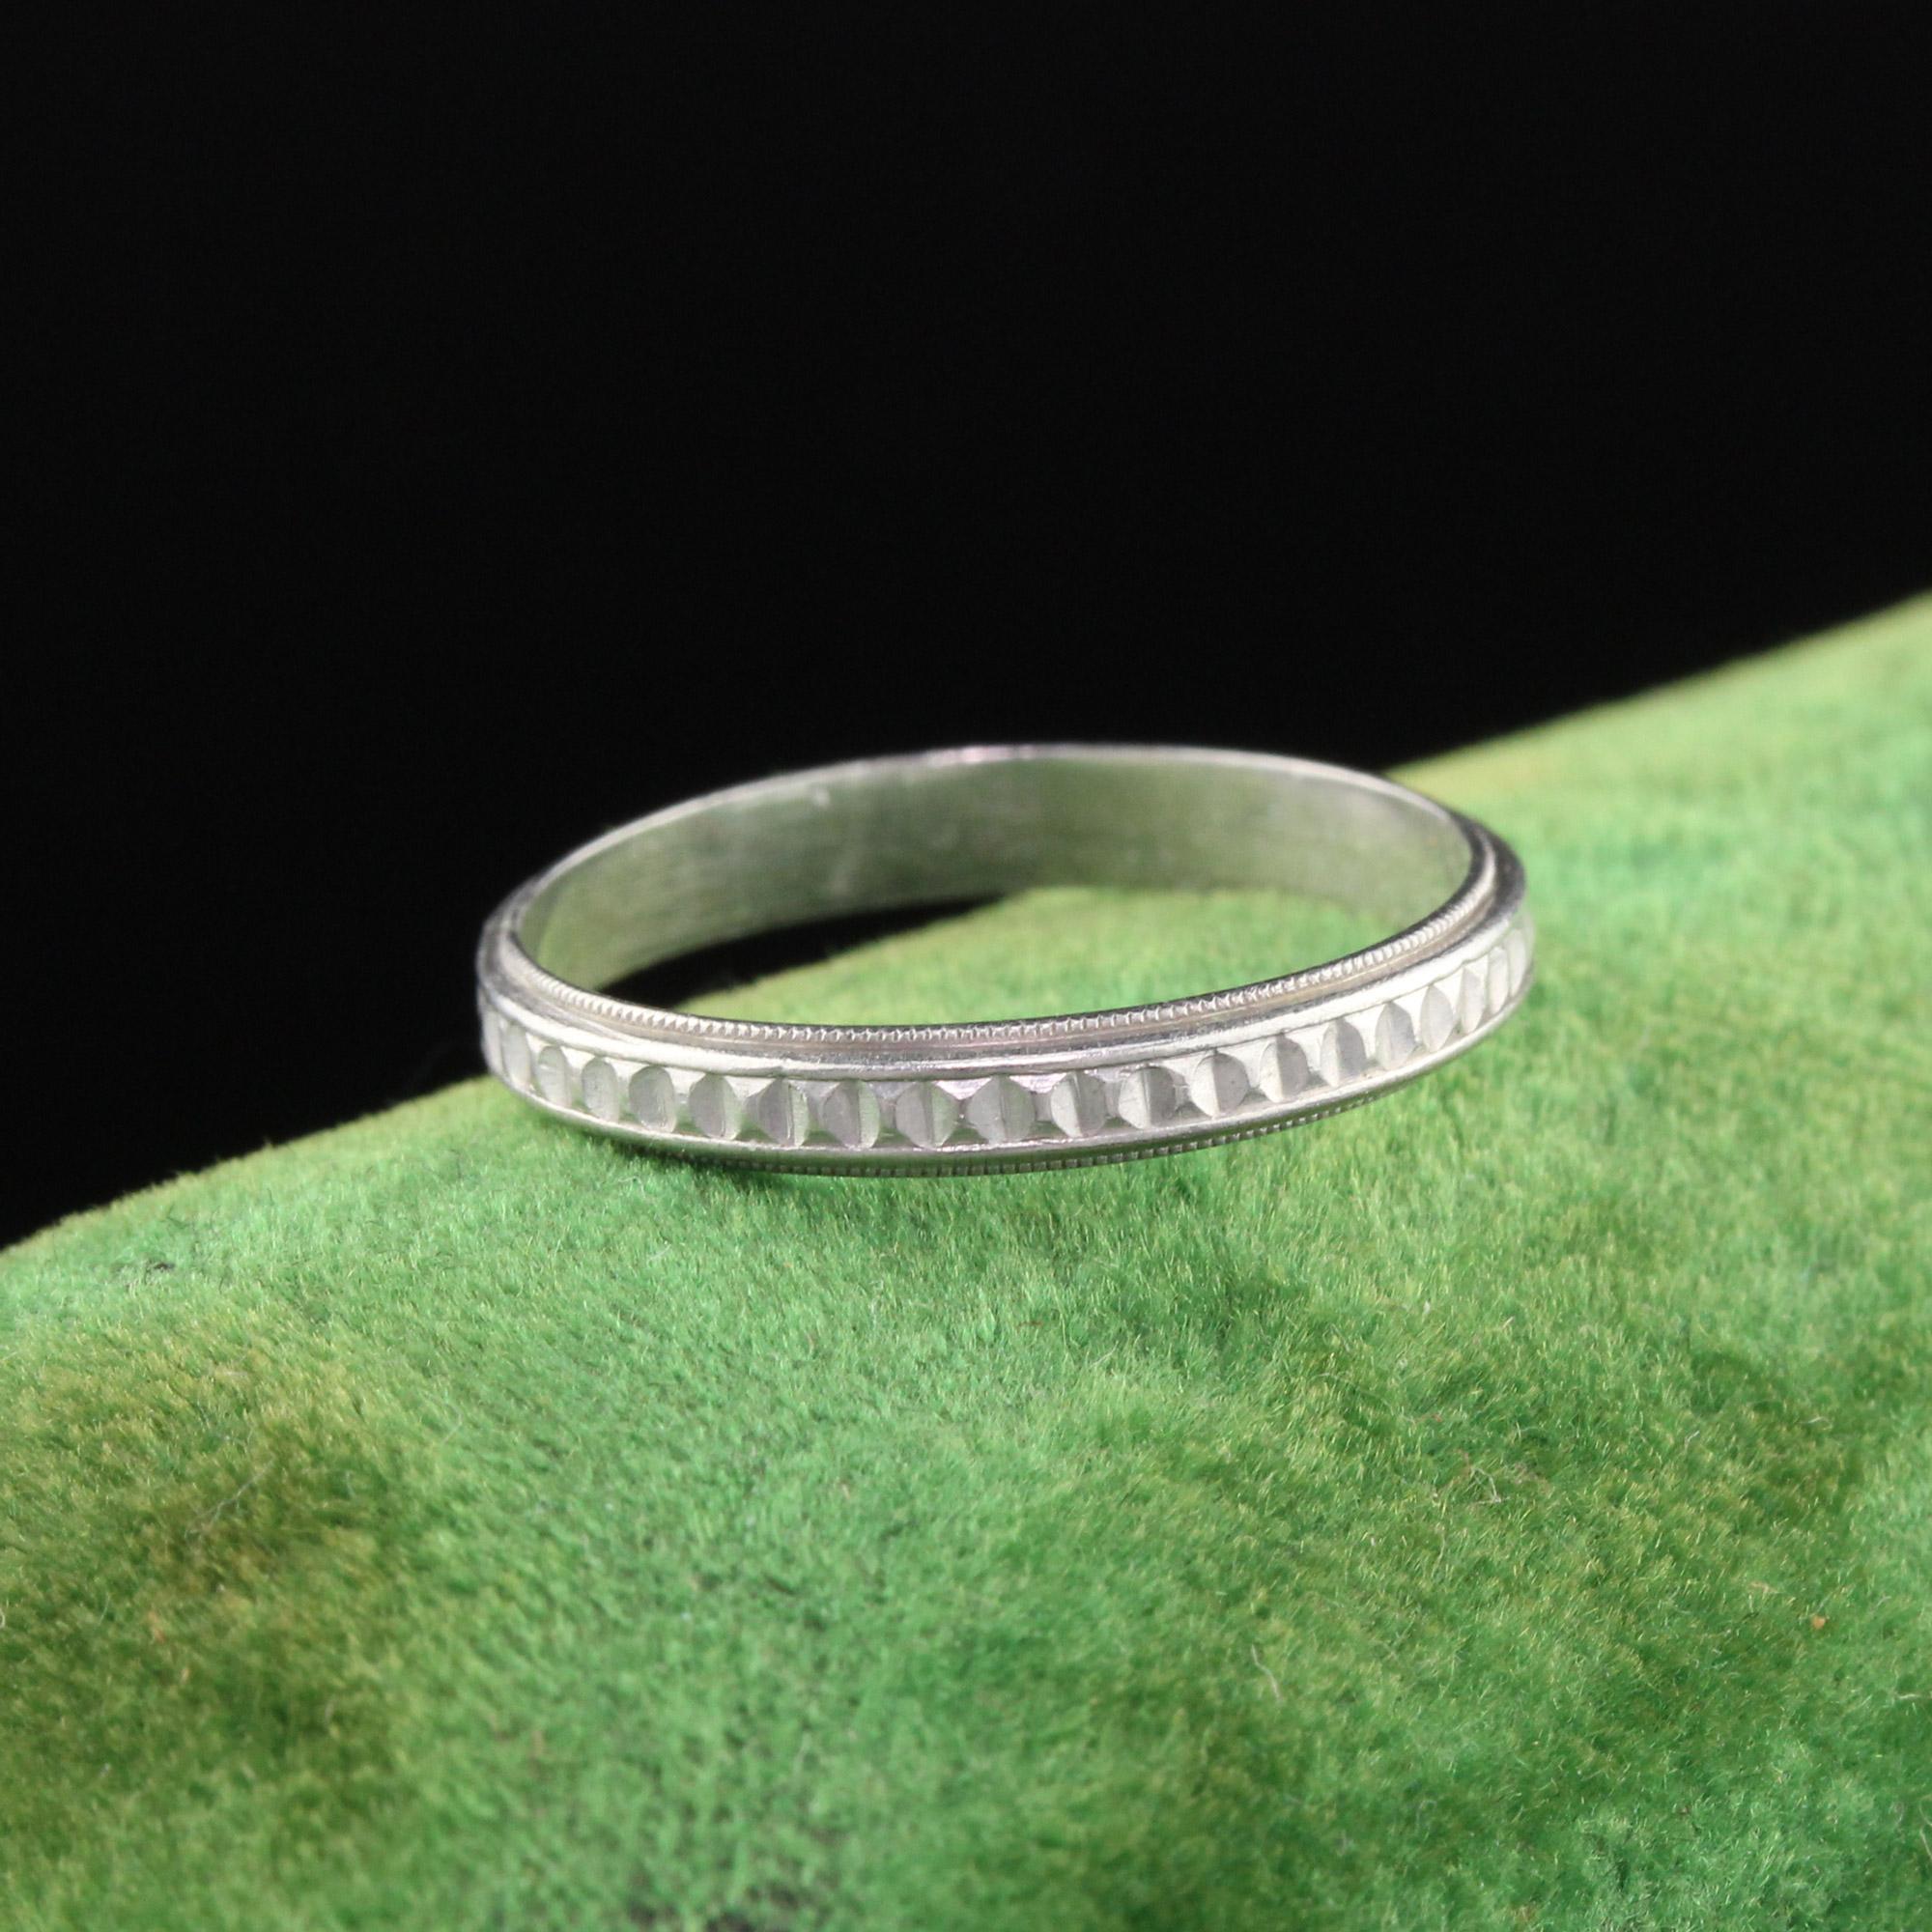 Vintage Estate Platinum band with small 'studs' going all the way around. Could be worn as a pinky ring, midi ring, or wedding band!

#R0218

Metal: Platinum

Weight: 2 Grams

Ring Size: 4.5

*Unfortunately this ring cannot be sized.

Measurements: